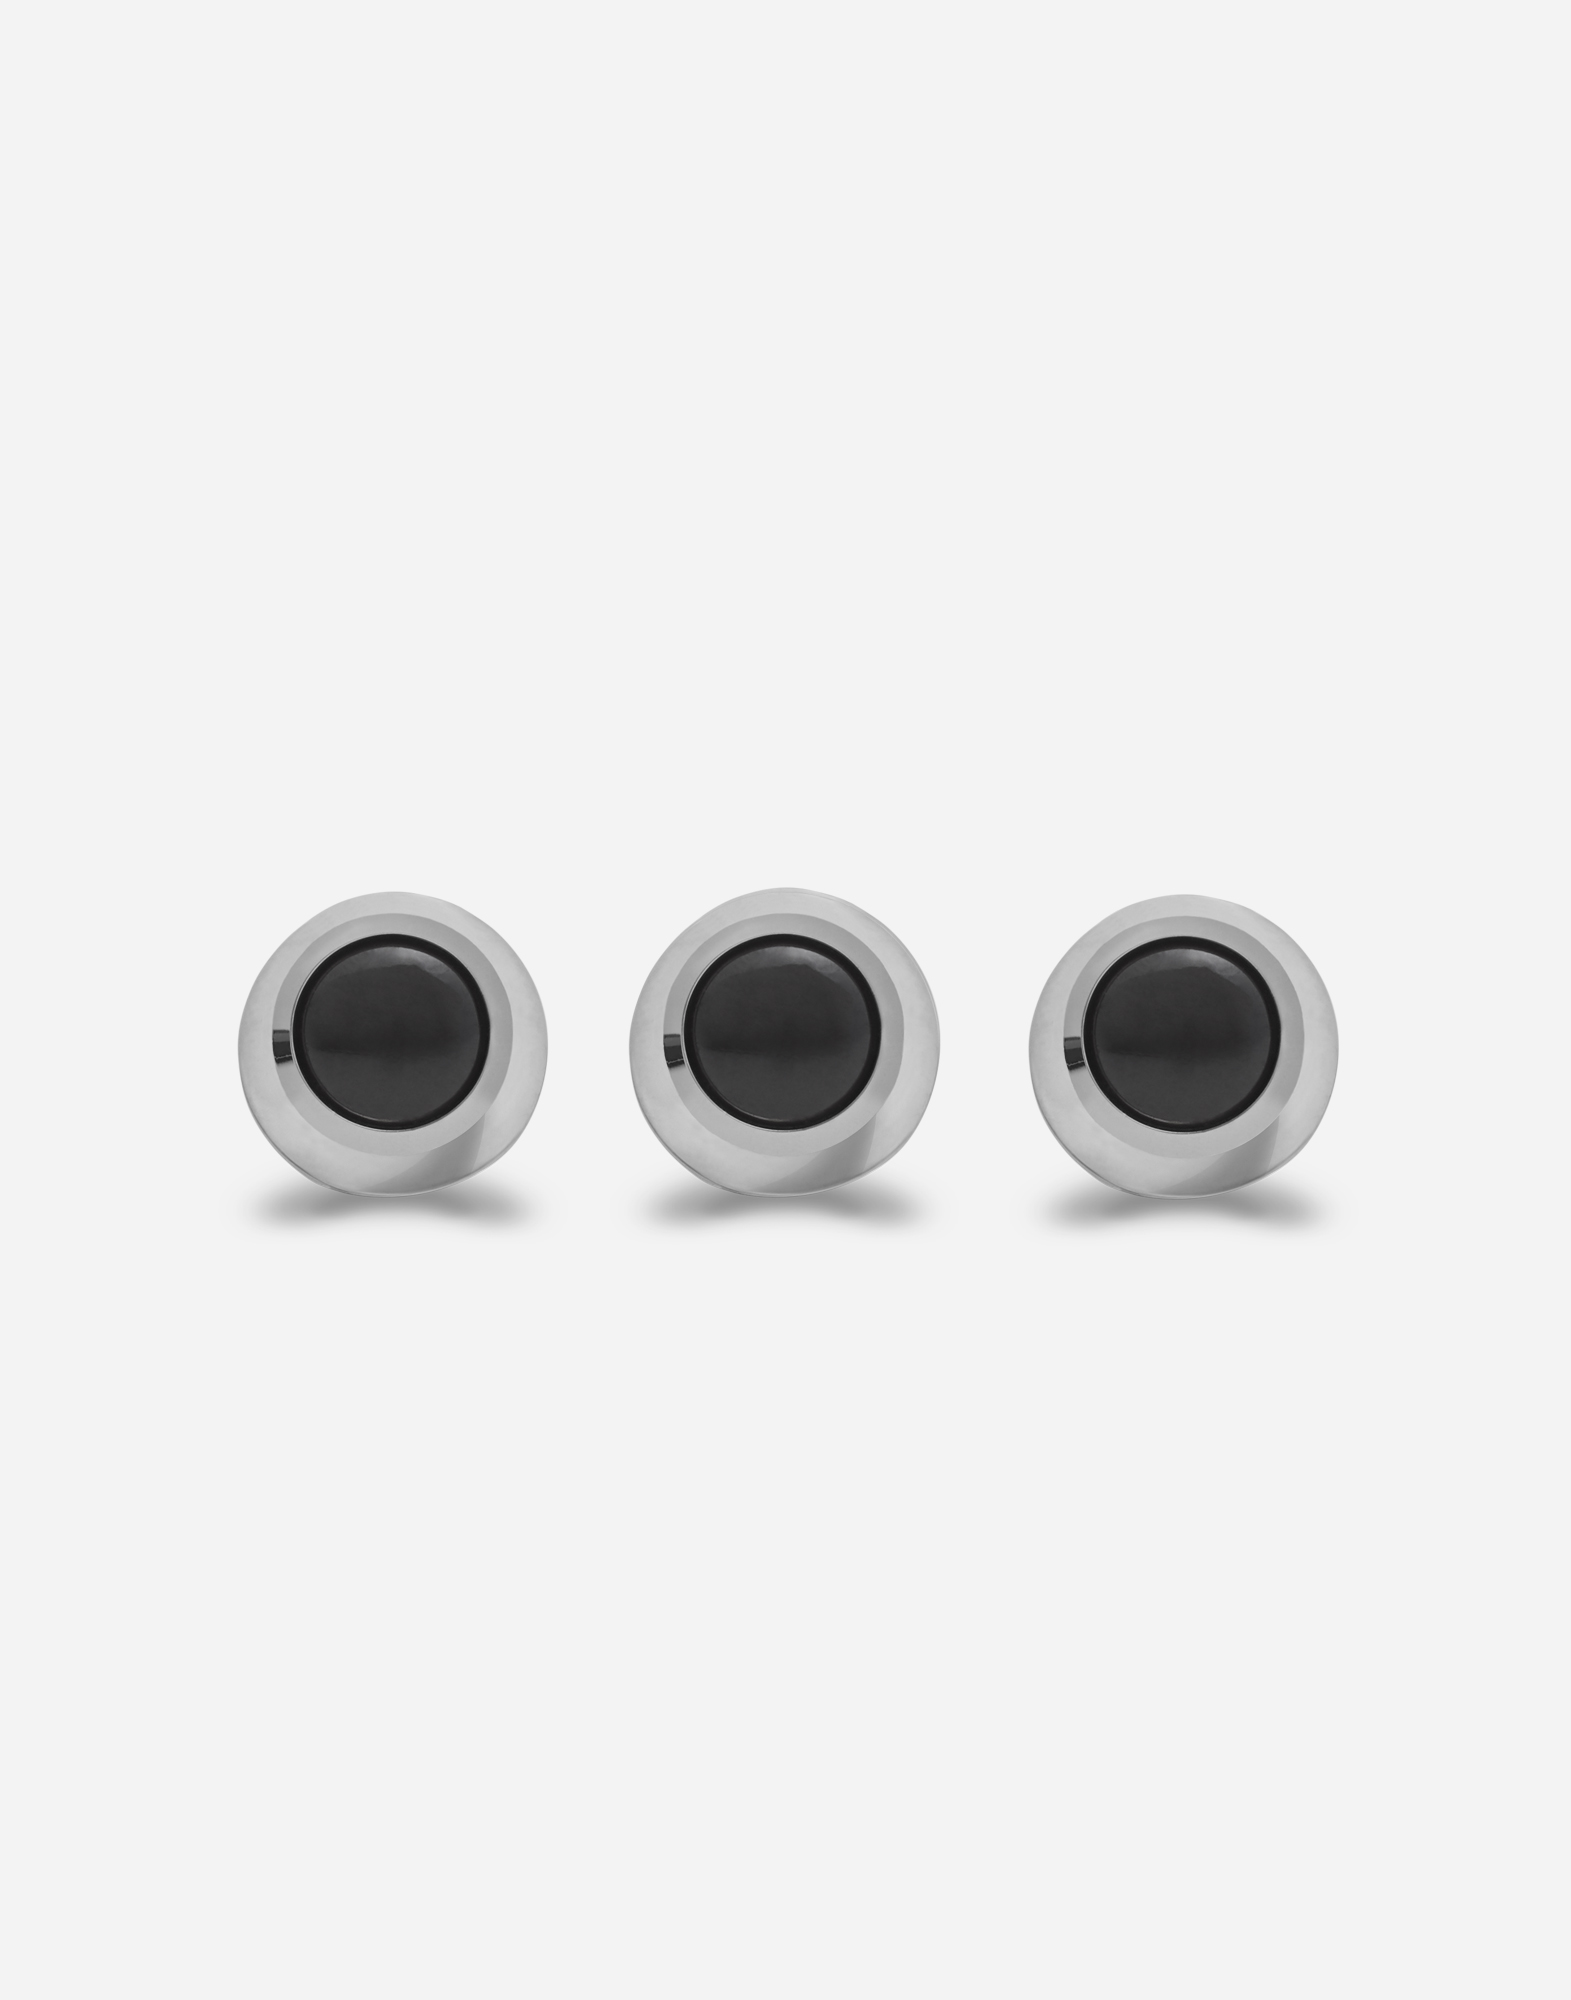 WHITE GOLD TUXEDO BUTTONS WITH BLACK JADES